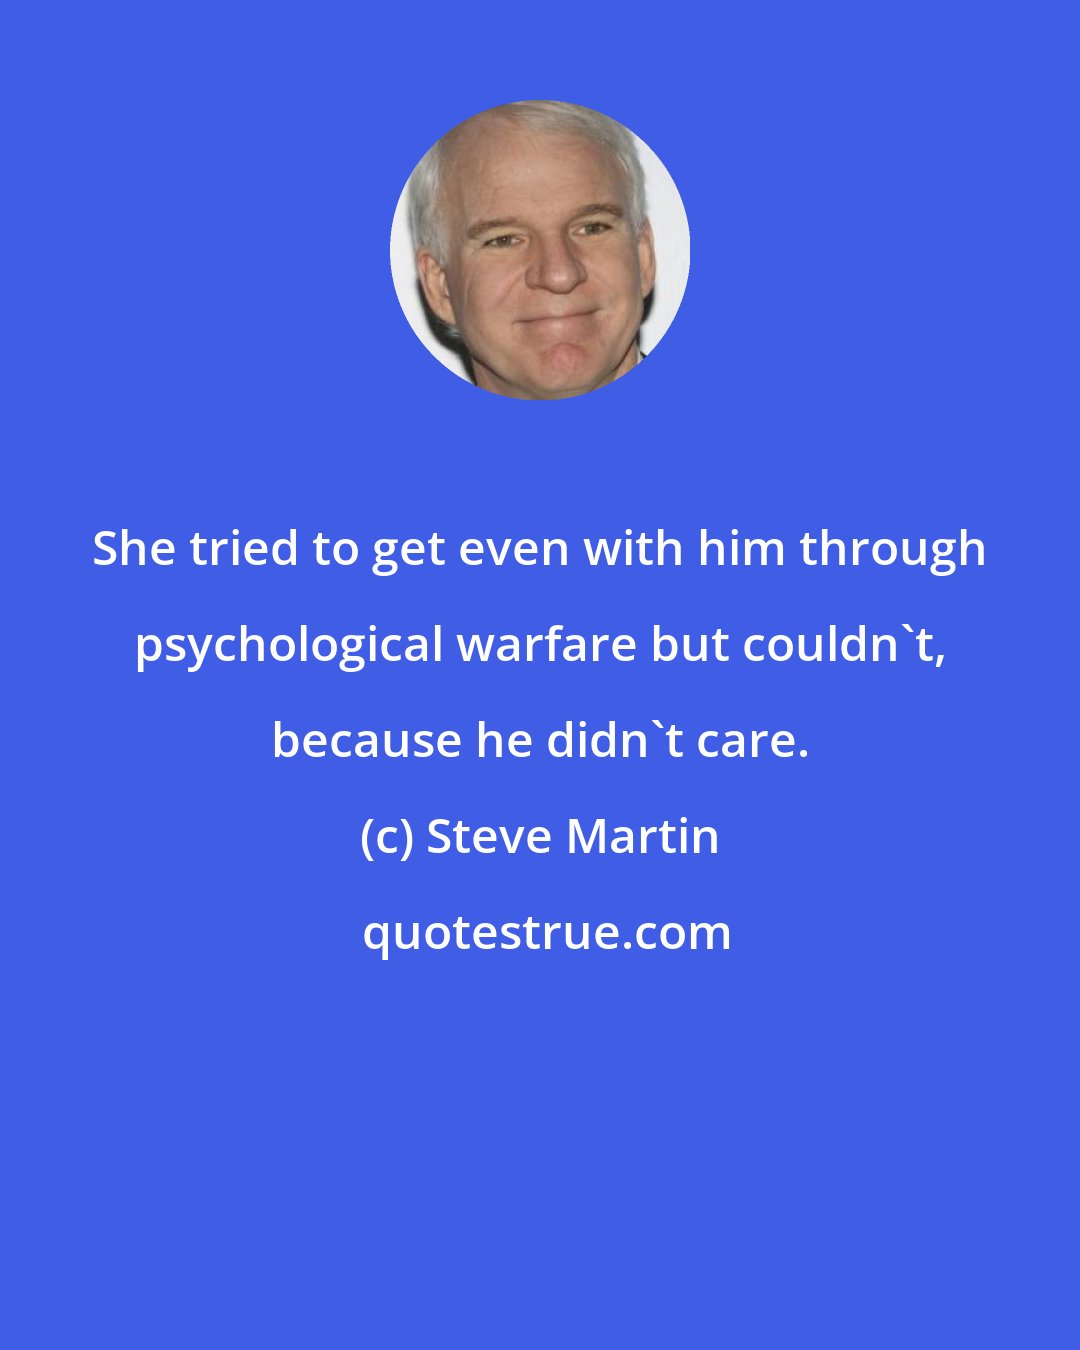 Steve Martin: She tried to get even with him through psychological warfare but couldn't, because he didn't care.